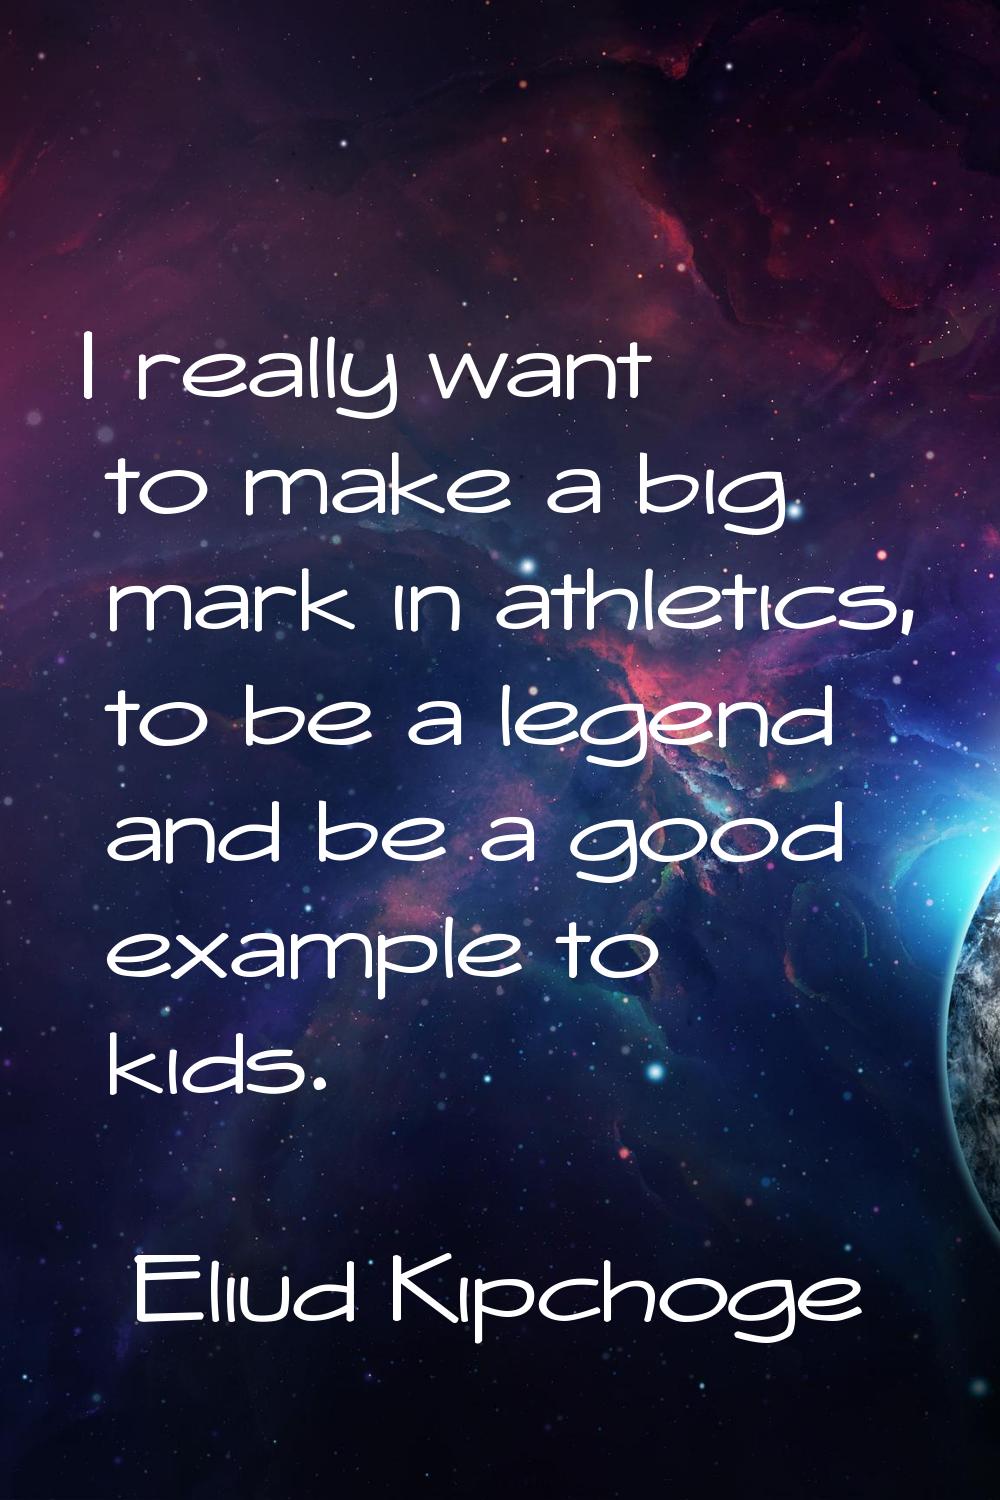 I really want to make a big mark in athletics, to be a legend and be a good example to kids.